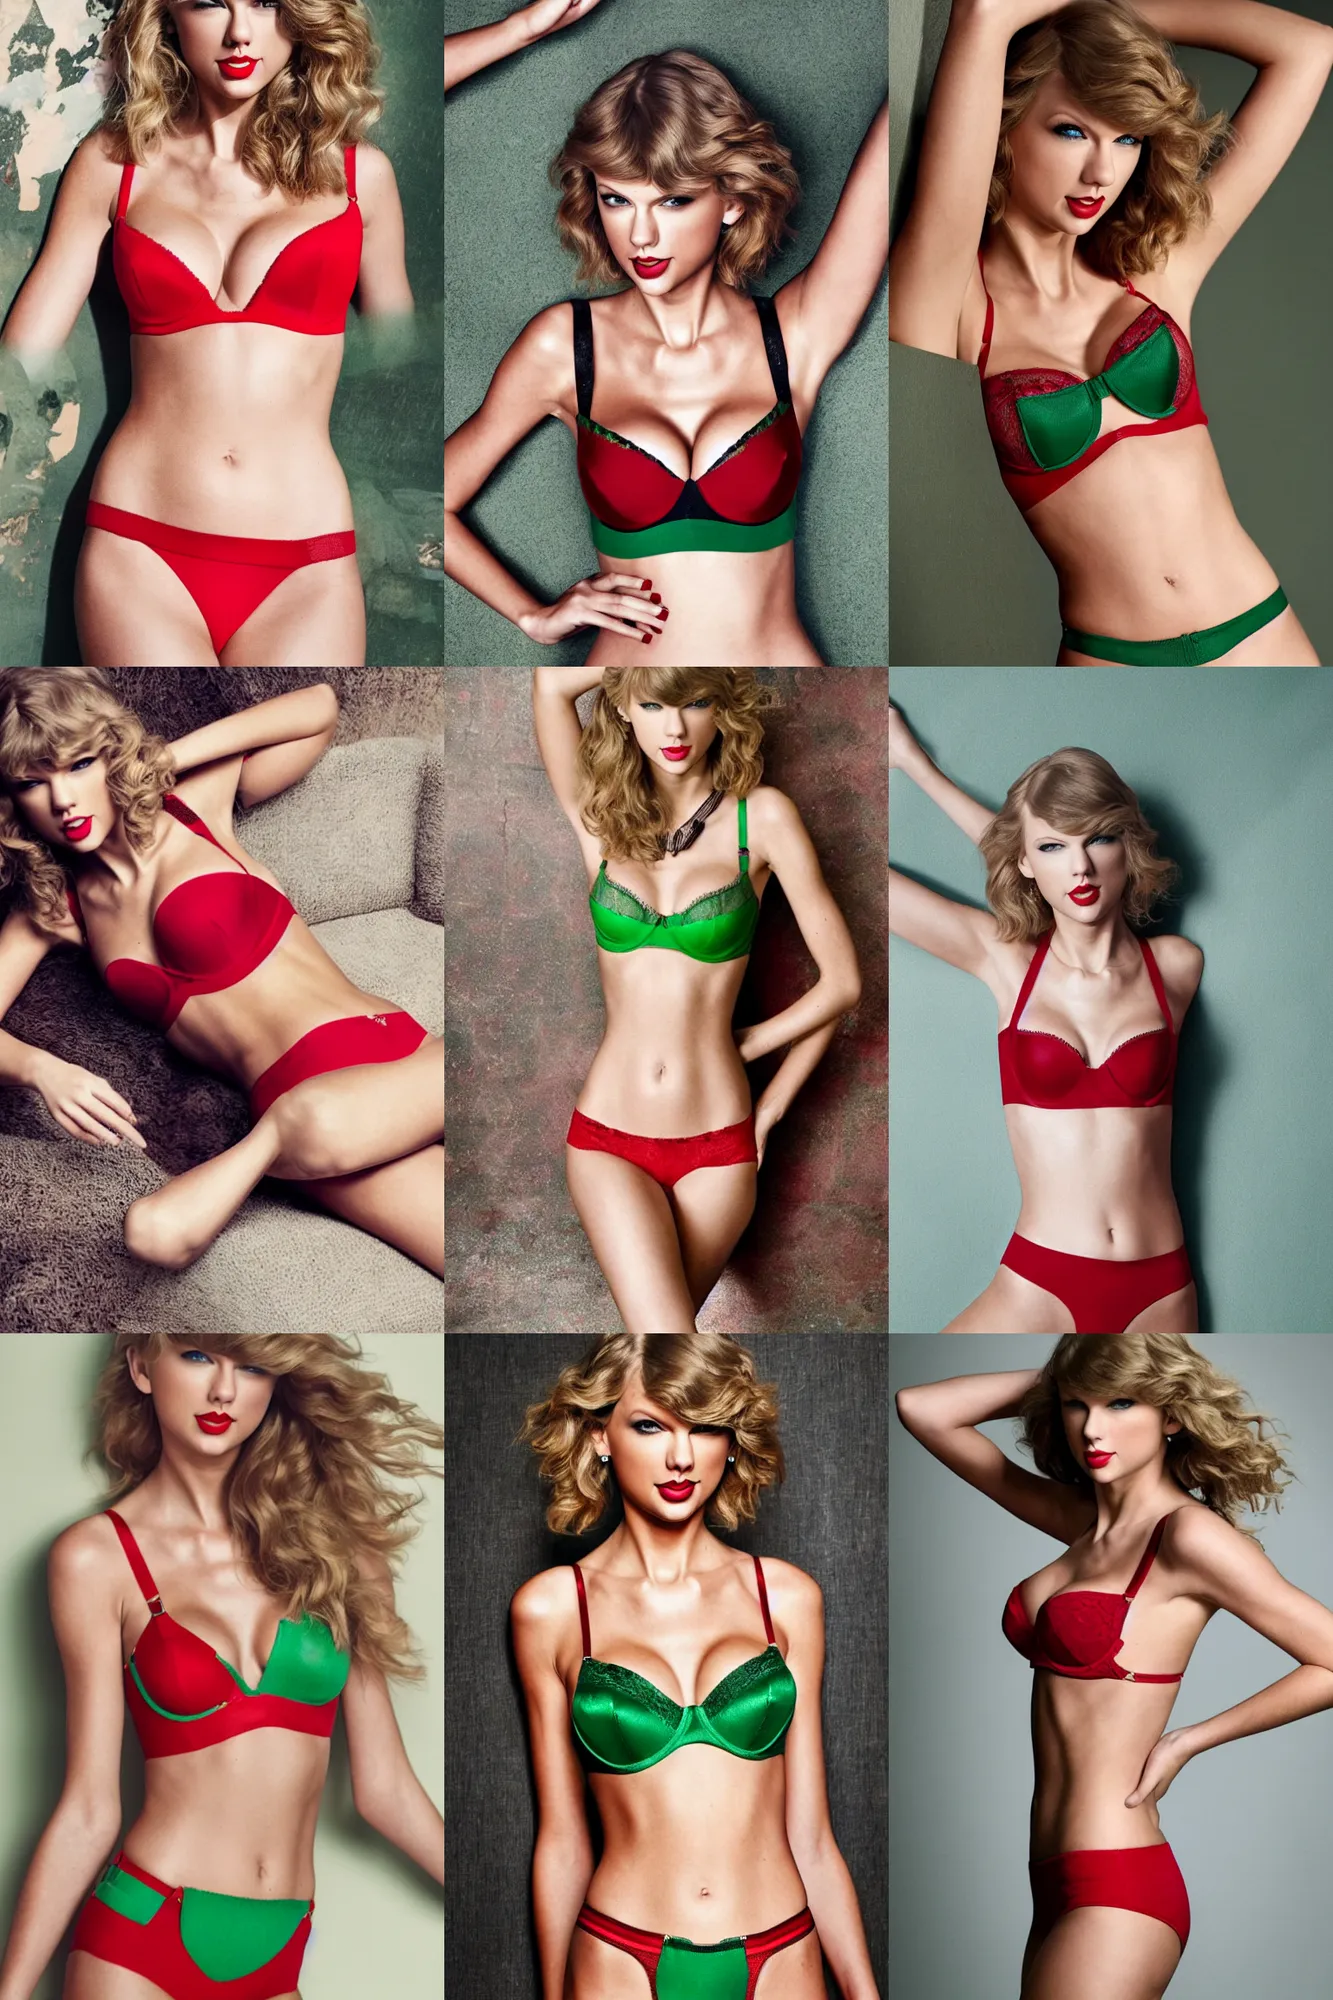 taylor swift modeling red bra and green panties